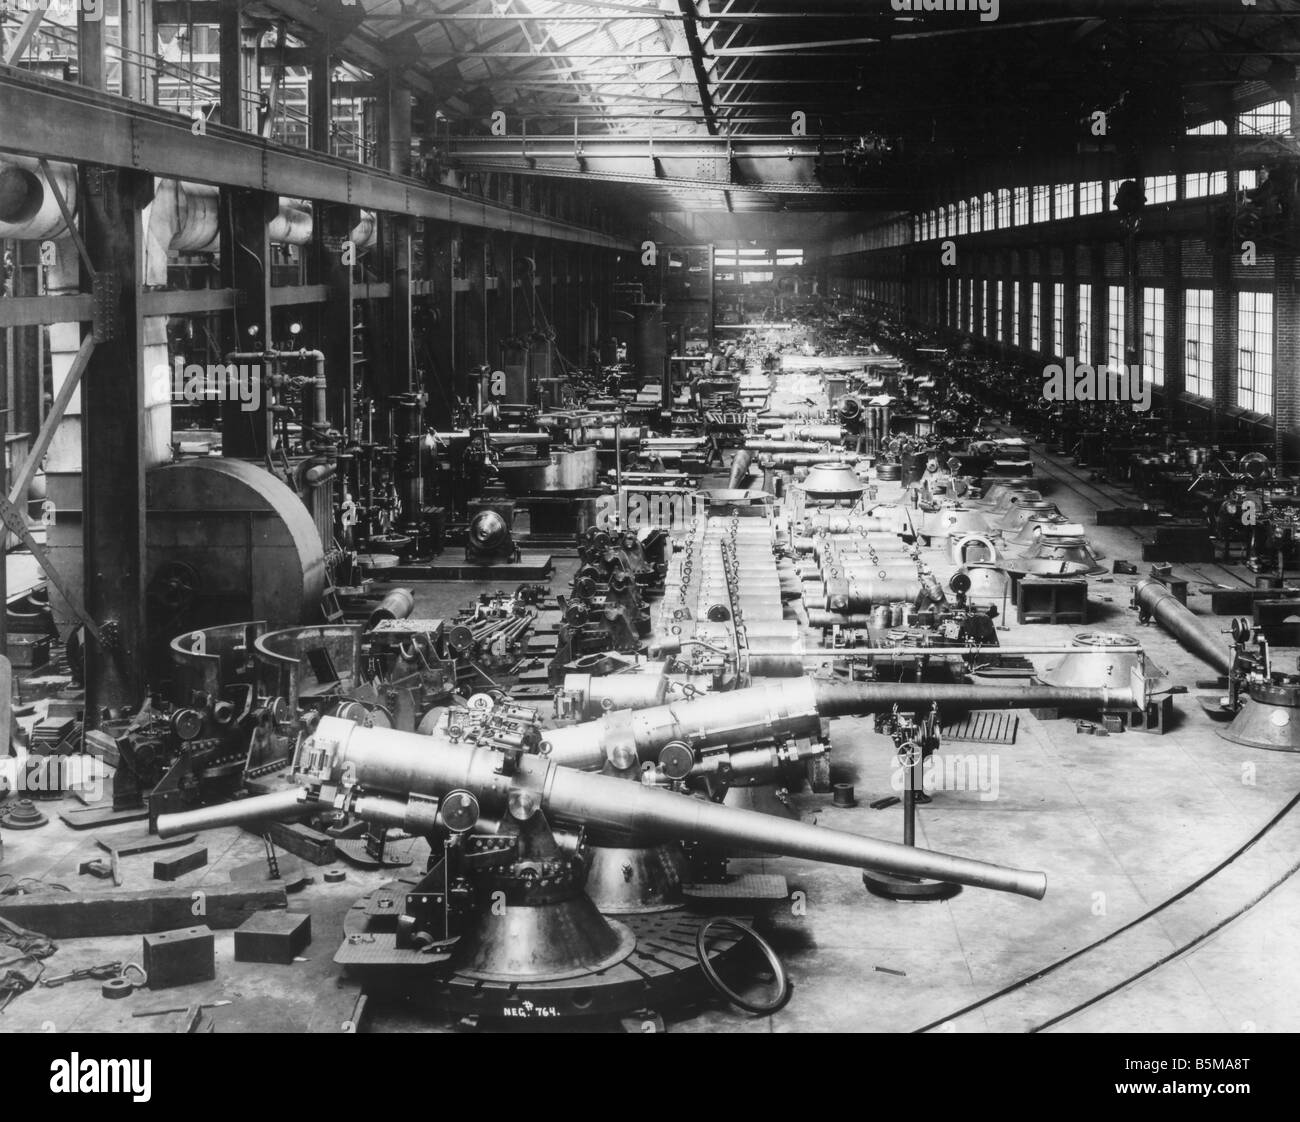 2 G55 R1 1918 5 US cannon factory hall World War I History World War I Arms industry USA Cannon production at the Bethleh em Ste Stock Photo